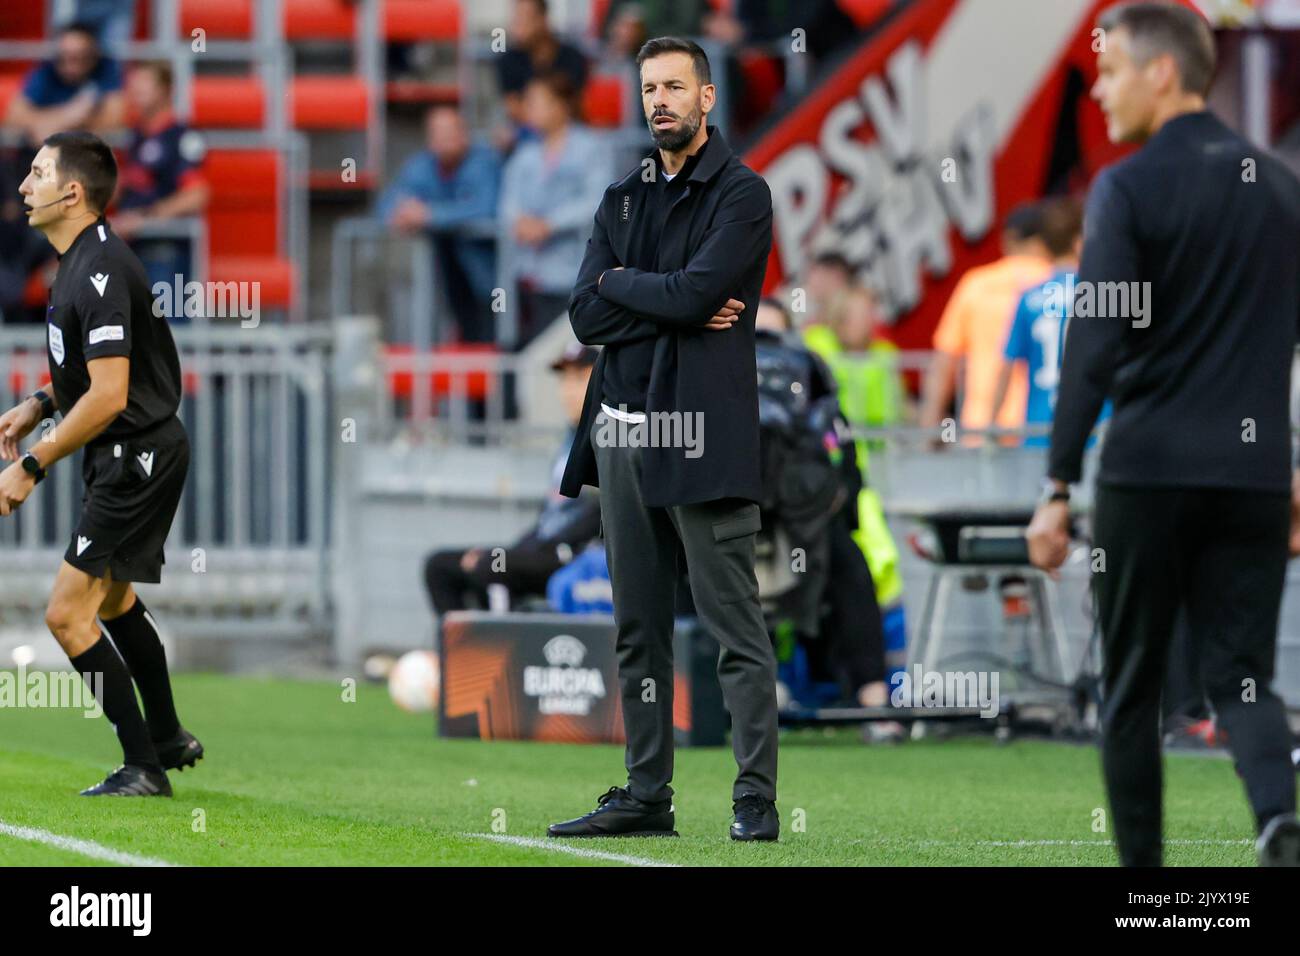 EINDHOVEN, NETHERLANDS - SEPTEMBER 8: trainer/coach Ruud van Nistelrooy of PSV Eindhoven during the Group A - UEFA Europa League match between PSV and Bodo/Glimt at Philips stadium on September 8, 2022 in Eindhoven, Netherlands (Photo by Broer van den Boom/Orange Pictures) Stock Photo